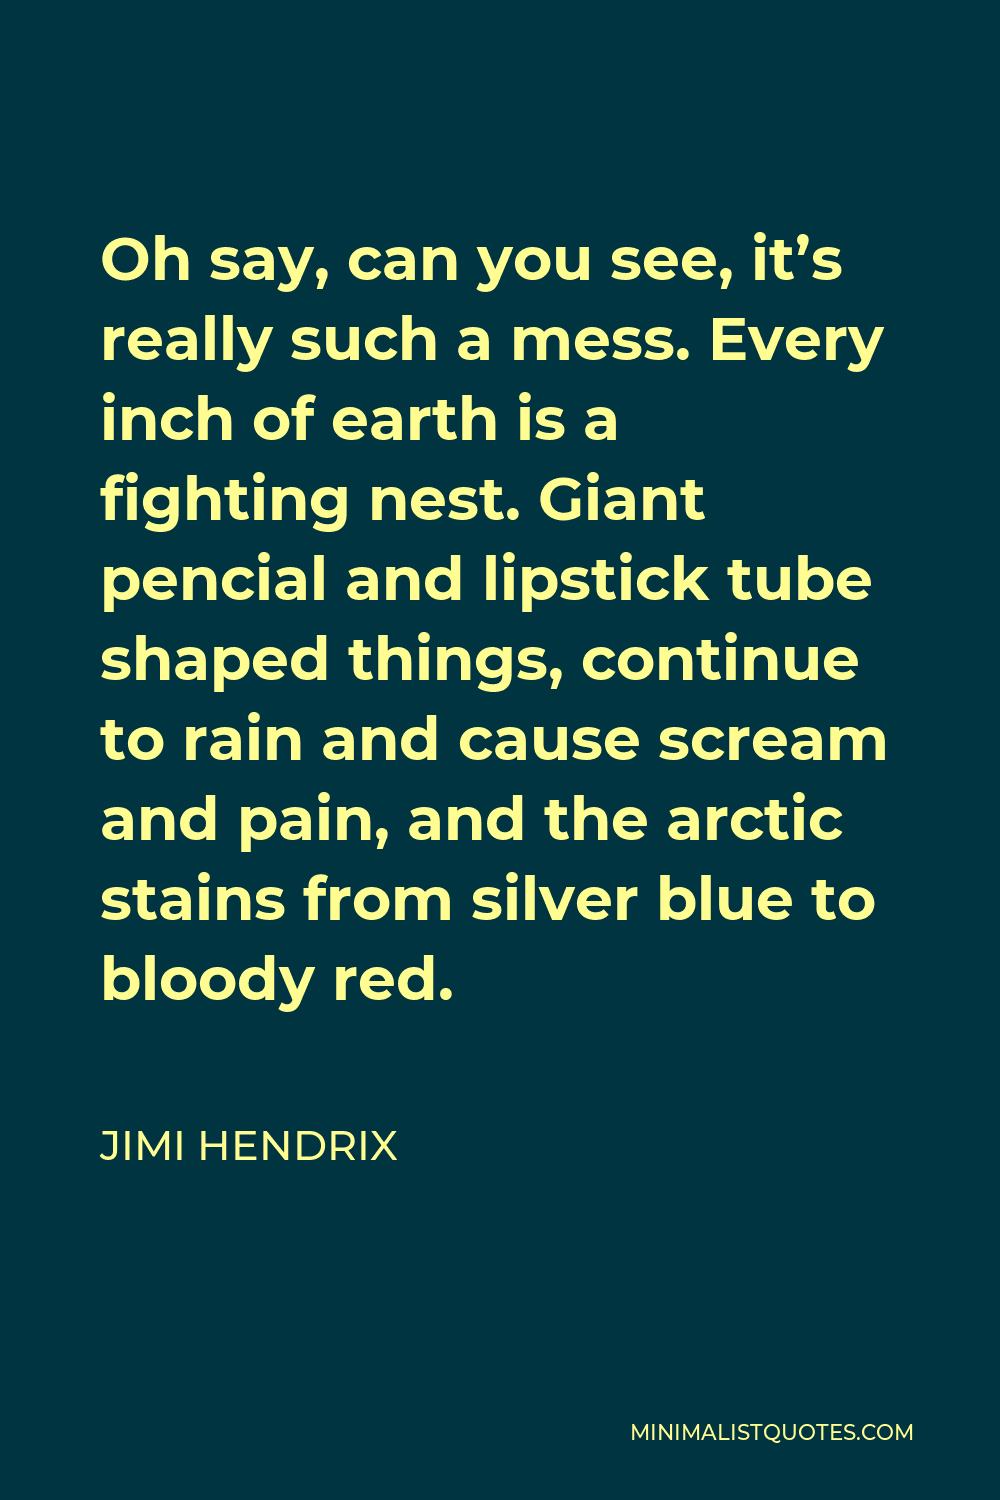 Jimi Hendrix Quote - Oh say, can you see, it’s really such a mess. Every inch of earth is a fighting nest. Giant pencial and lipstick tube shaped things, continue to rain and cause scream and pain, and the arctic stains from silver blue to bloody red.